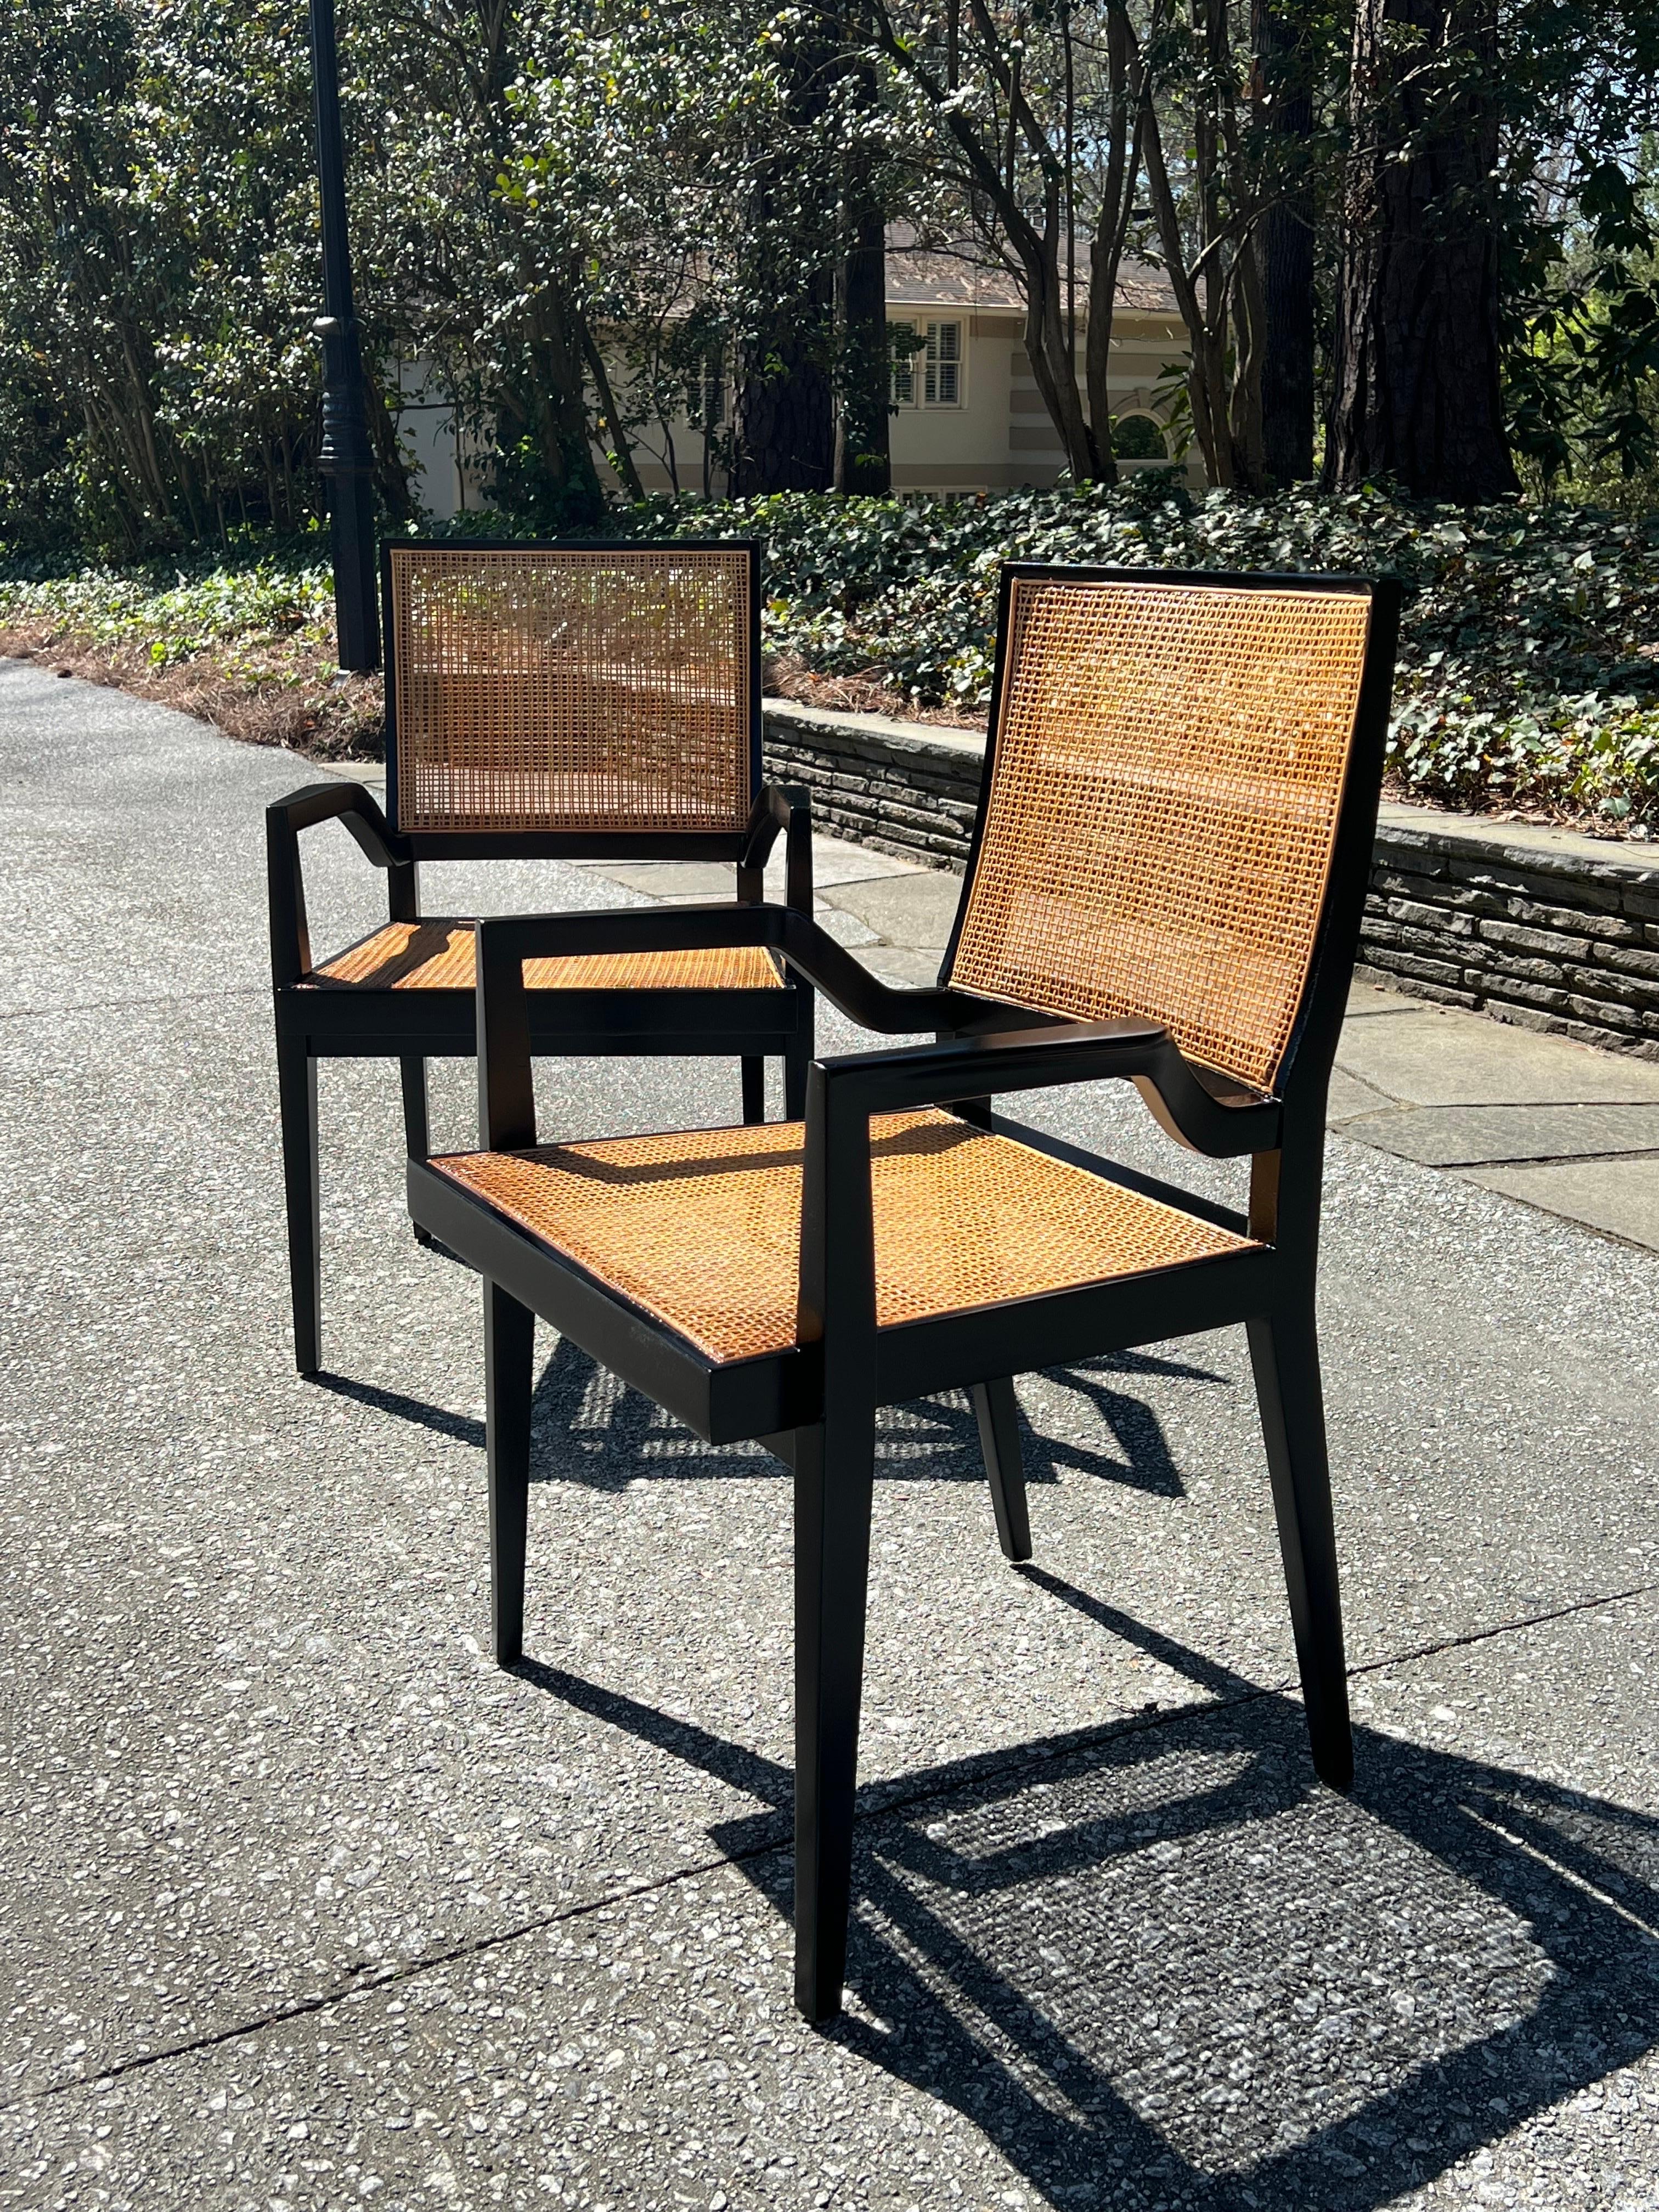 Dramatic Set of 20 Sophisticated Black Lacquer Cane Arm Chairs by Michael Taylor In Excellent Condition For Sale In Atlanta, GA